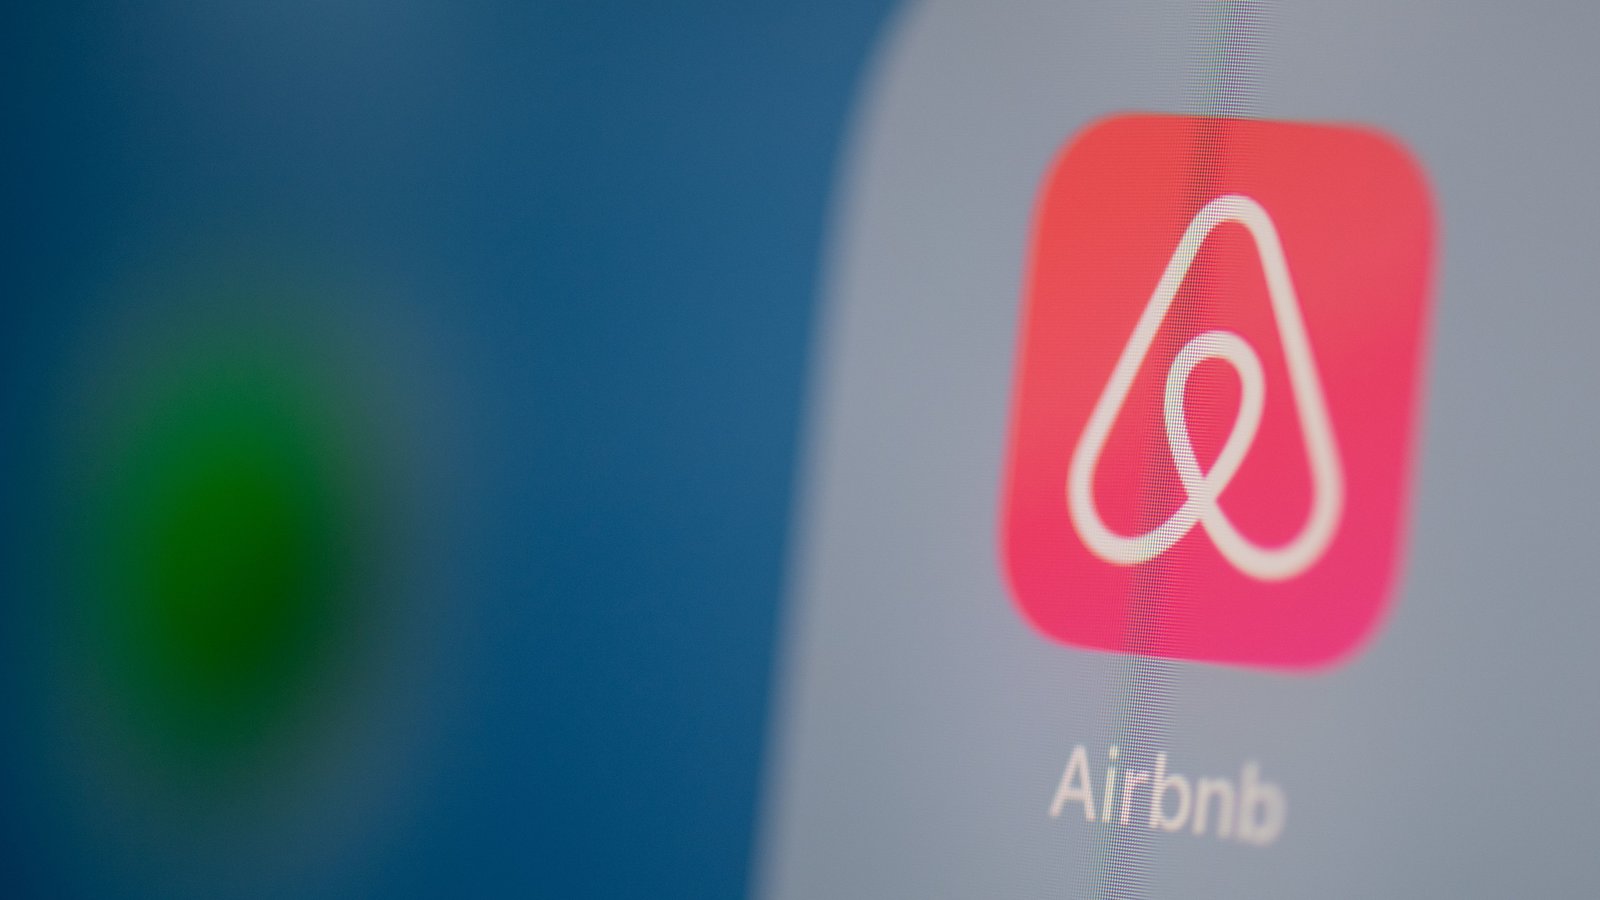 Airbnb Says It Plans to Go Public in 2020